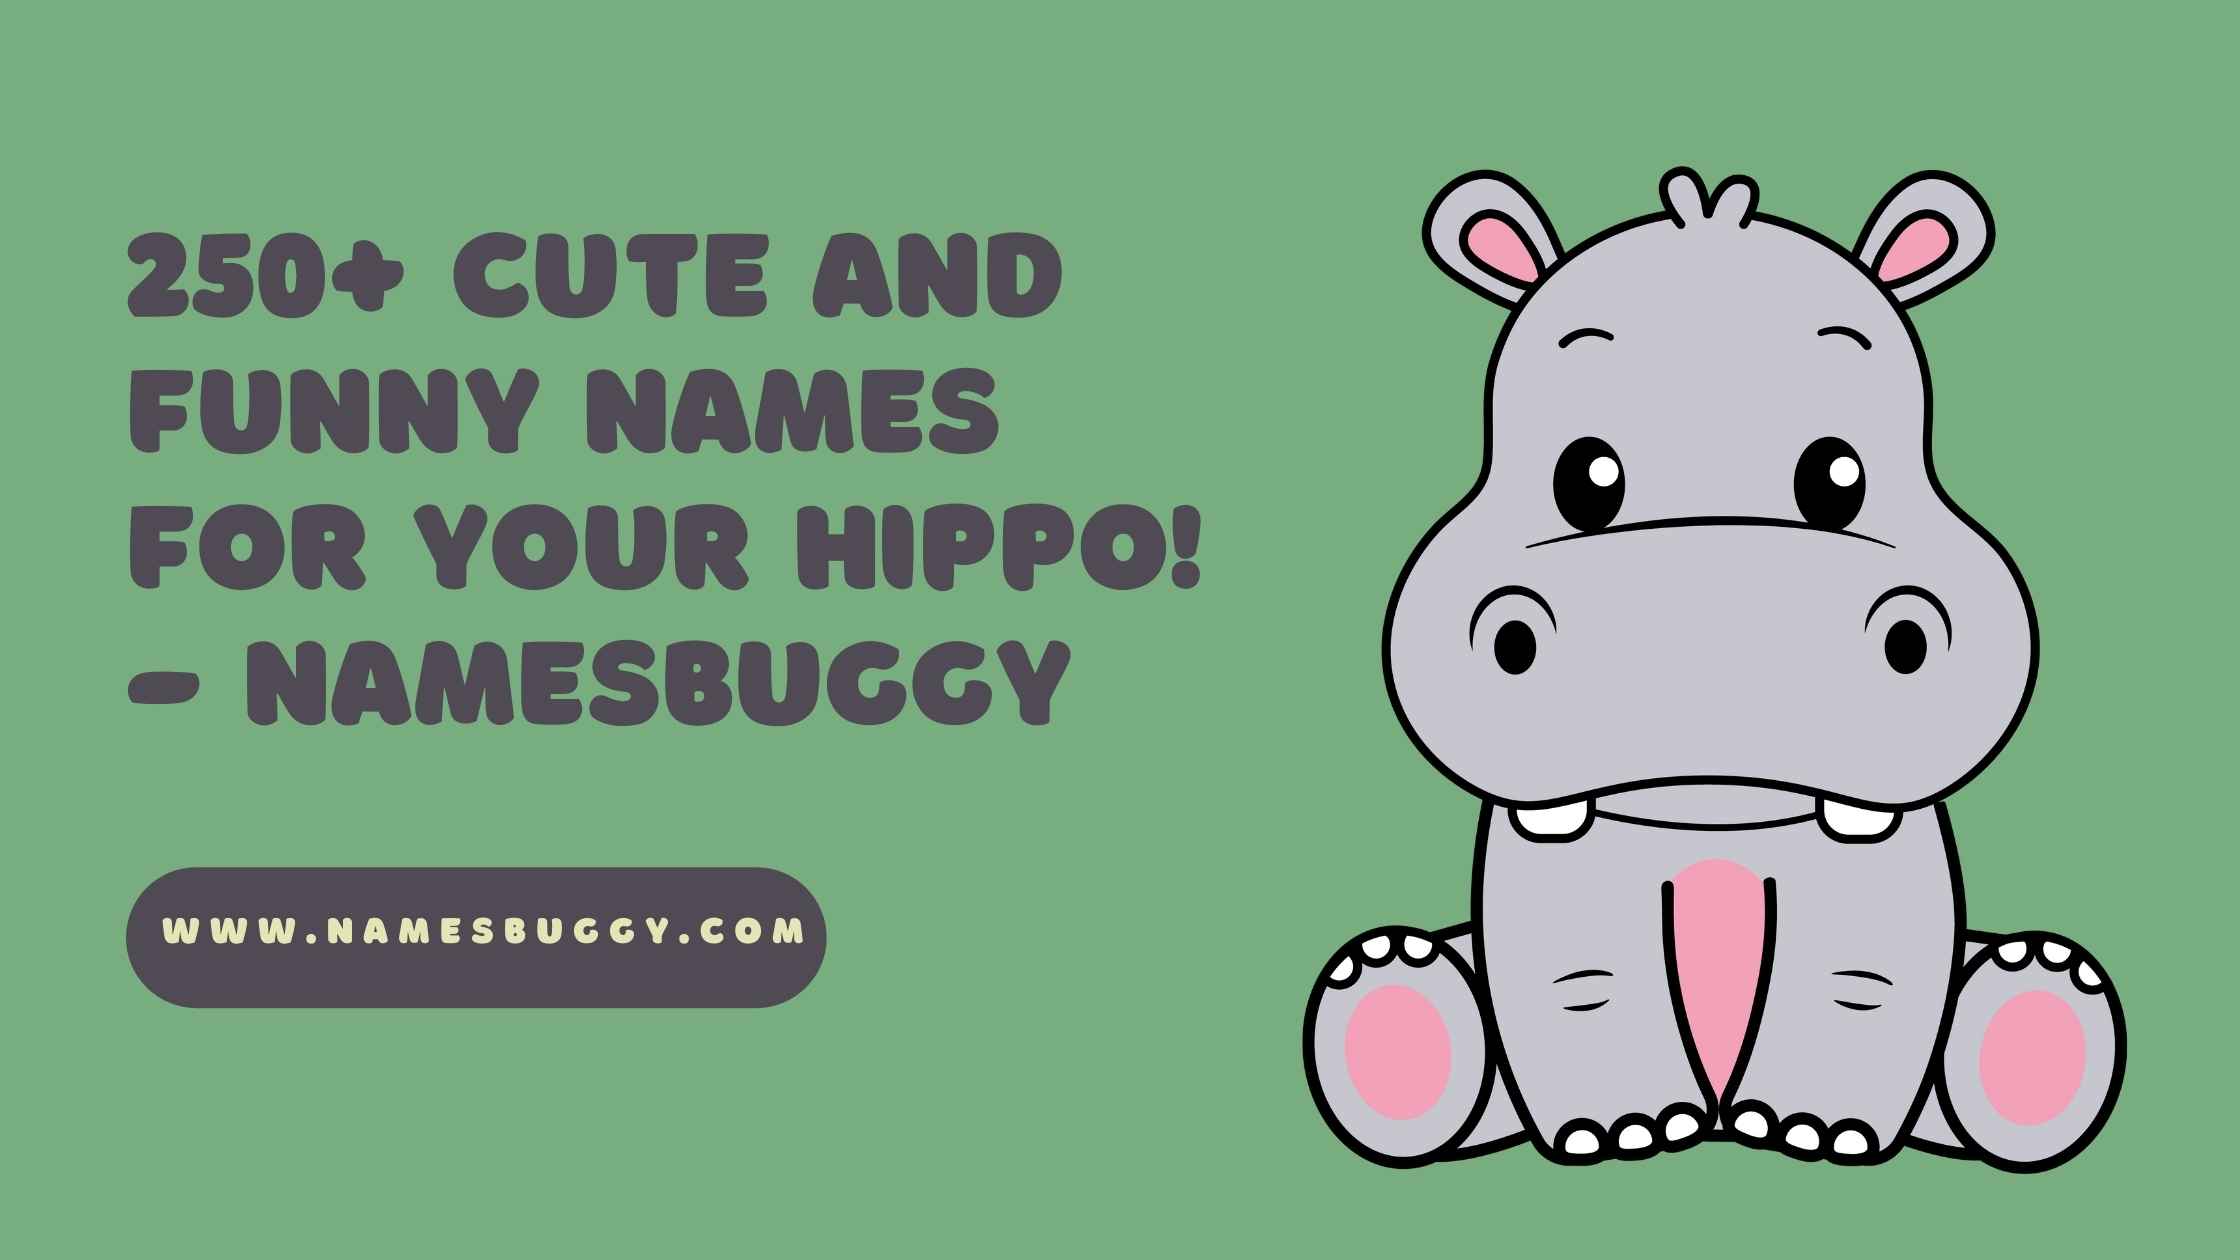 250+ Cute and Funny Names for your Hippo! - NamesBuggy